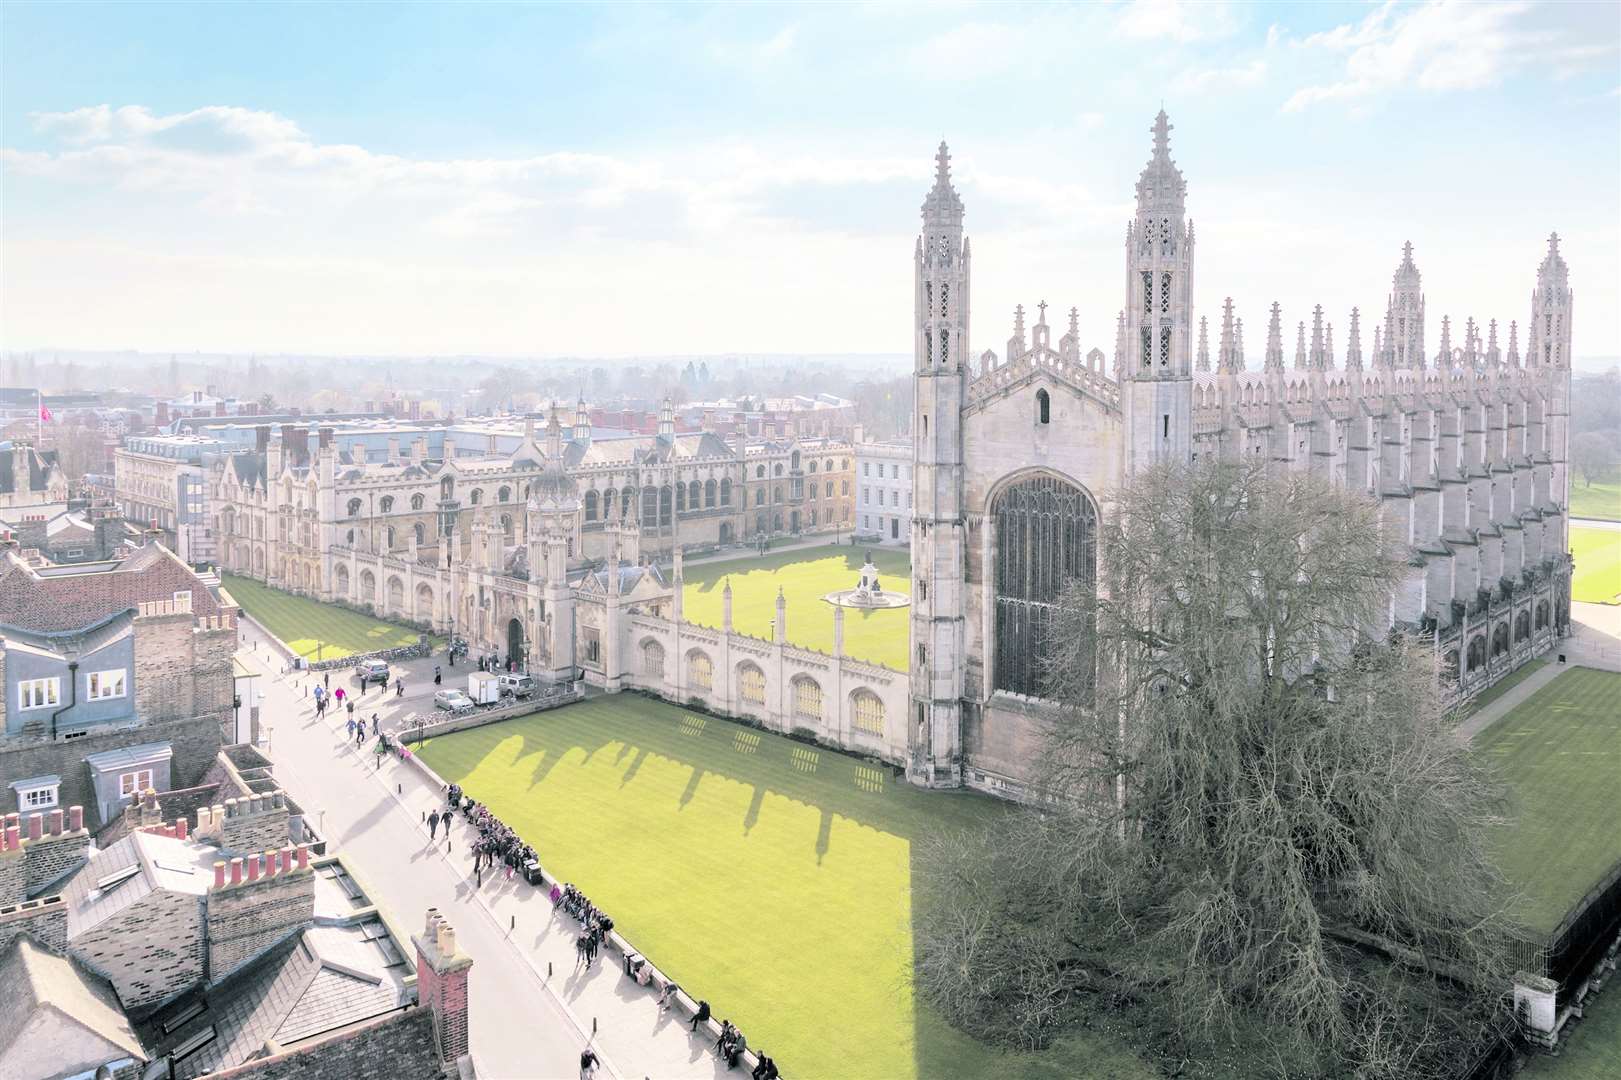 The service would connect the county town with Cambridge Picture: iStock